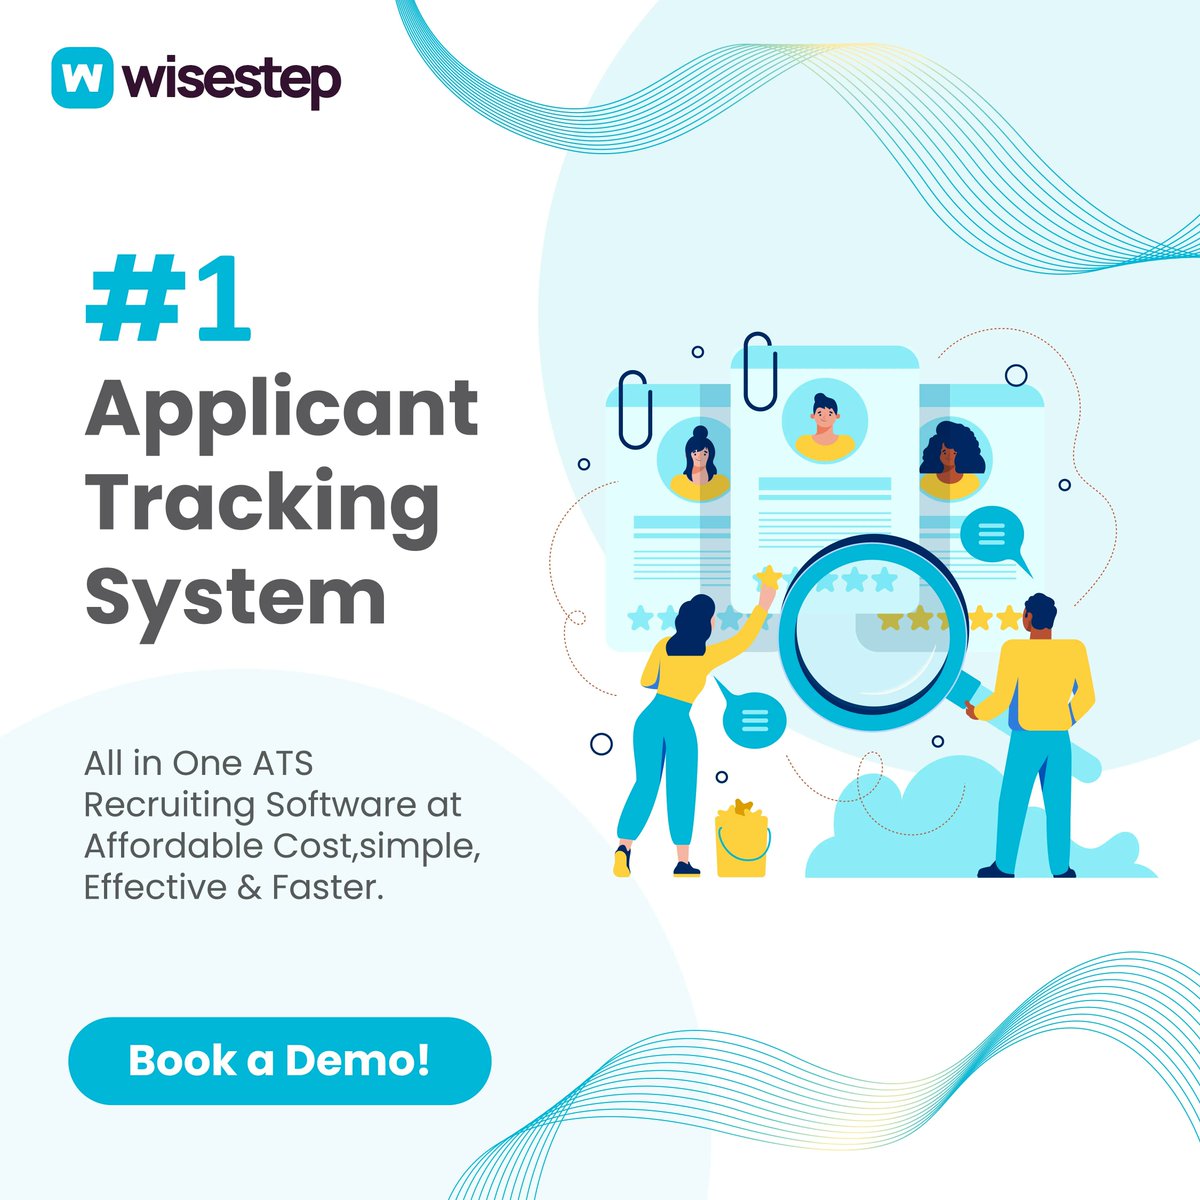 Worried about compliance and data security? Wisestep ATS ensures your hiring process aligns with privacy regulations and offers data protection measures

Book a demo now to know more about Wisestep

buff.ly/3SywYr8

#ATS  #datasecurity #WisestepATS #recruitment